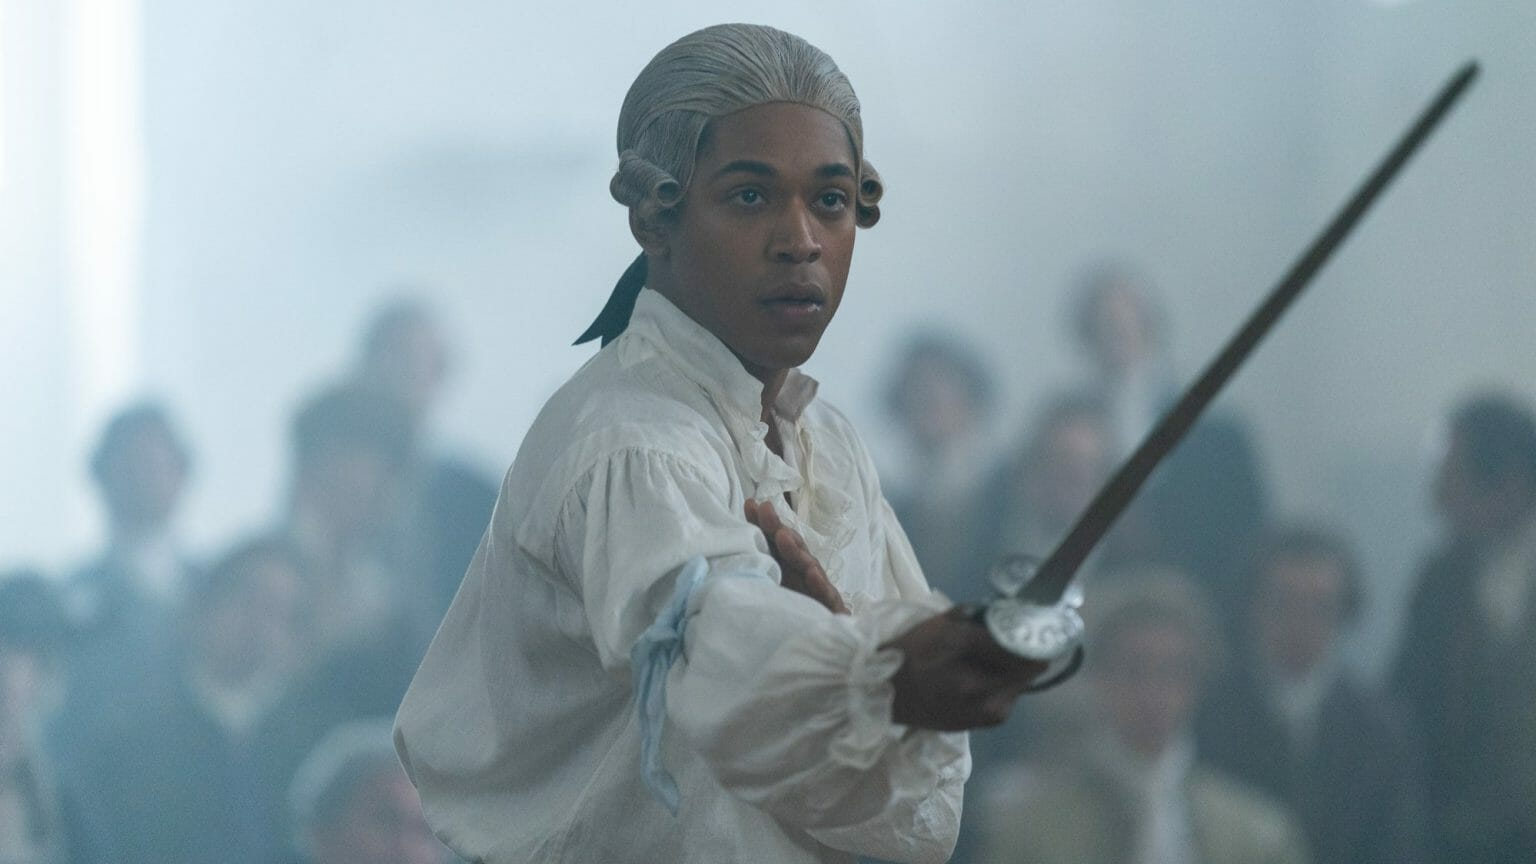 Kelvin Harrison Jr. stars as the French composer Joseph Bologne, Chevalier de Saint-Georges, wearing a white wig and holding his sword in the middle of an intense fencing match in the period biopic film CHEVALIER.